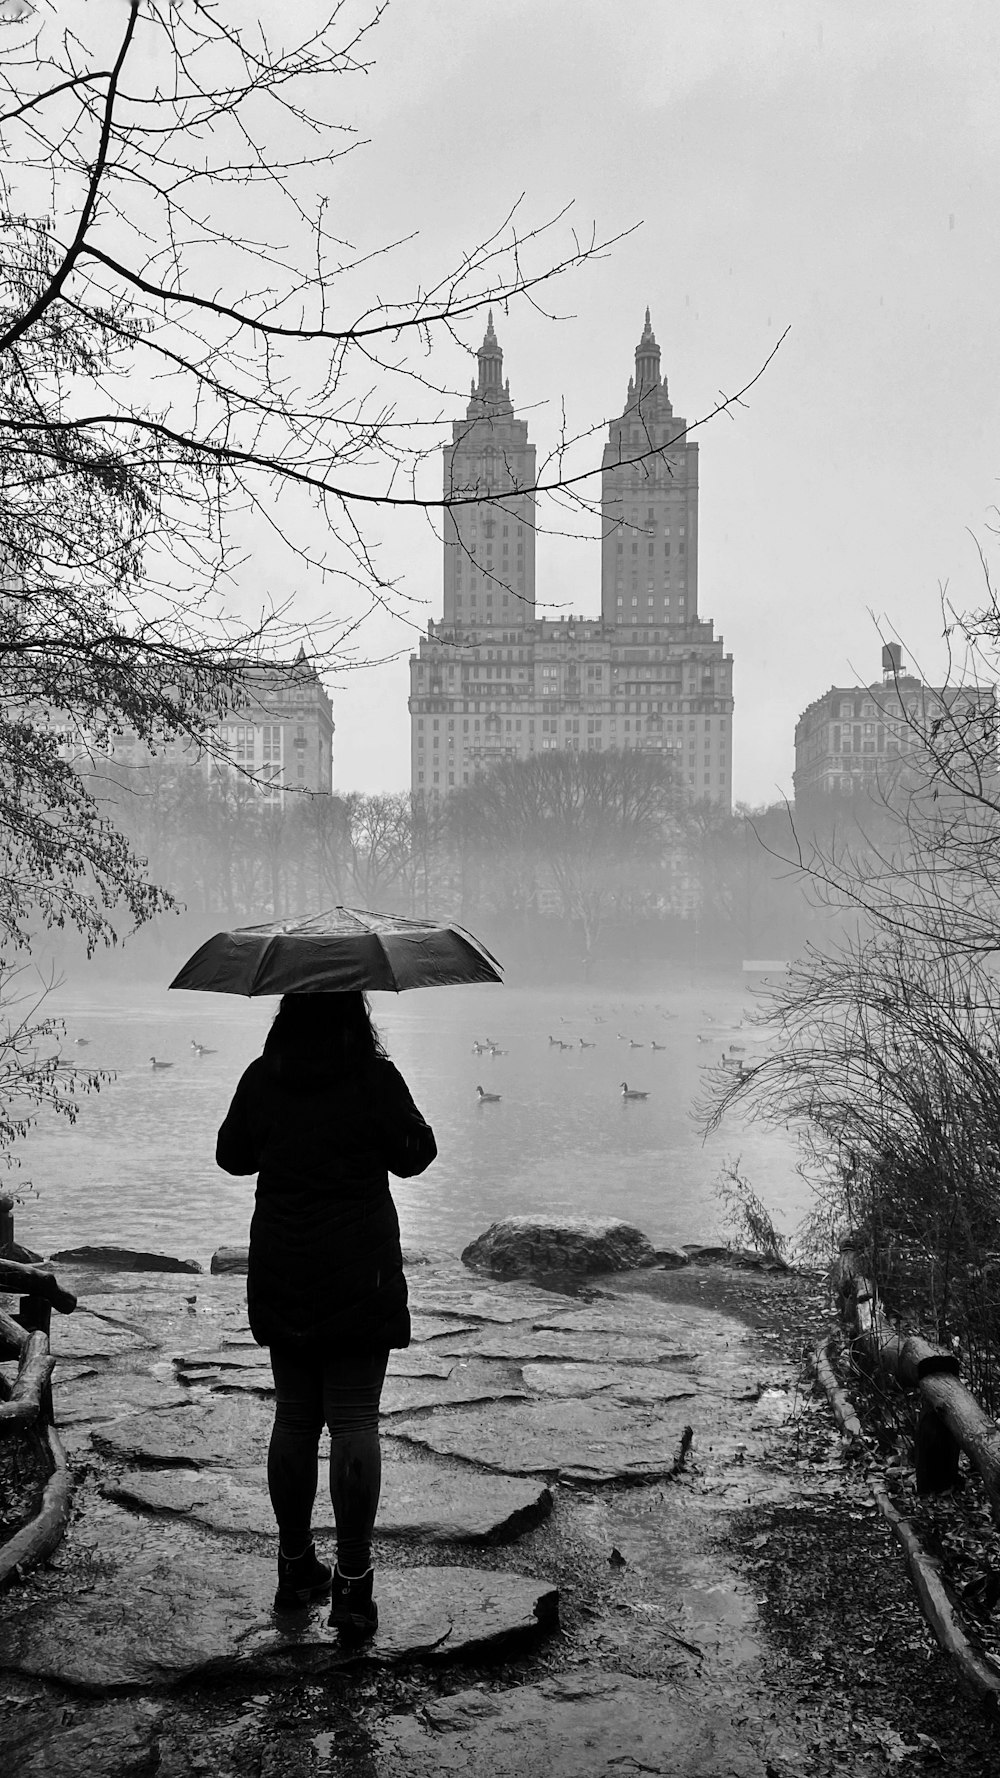 a person with an umbrella standing on a path near a body of water